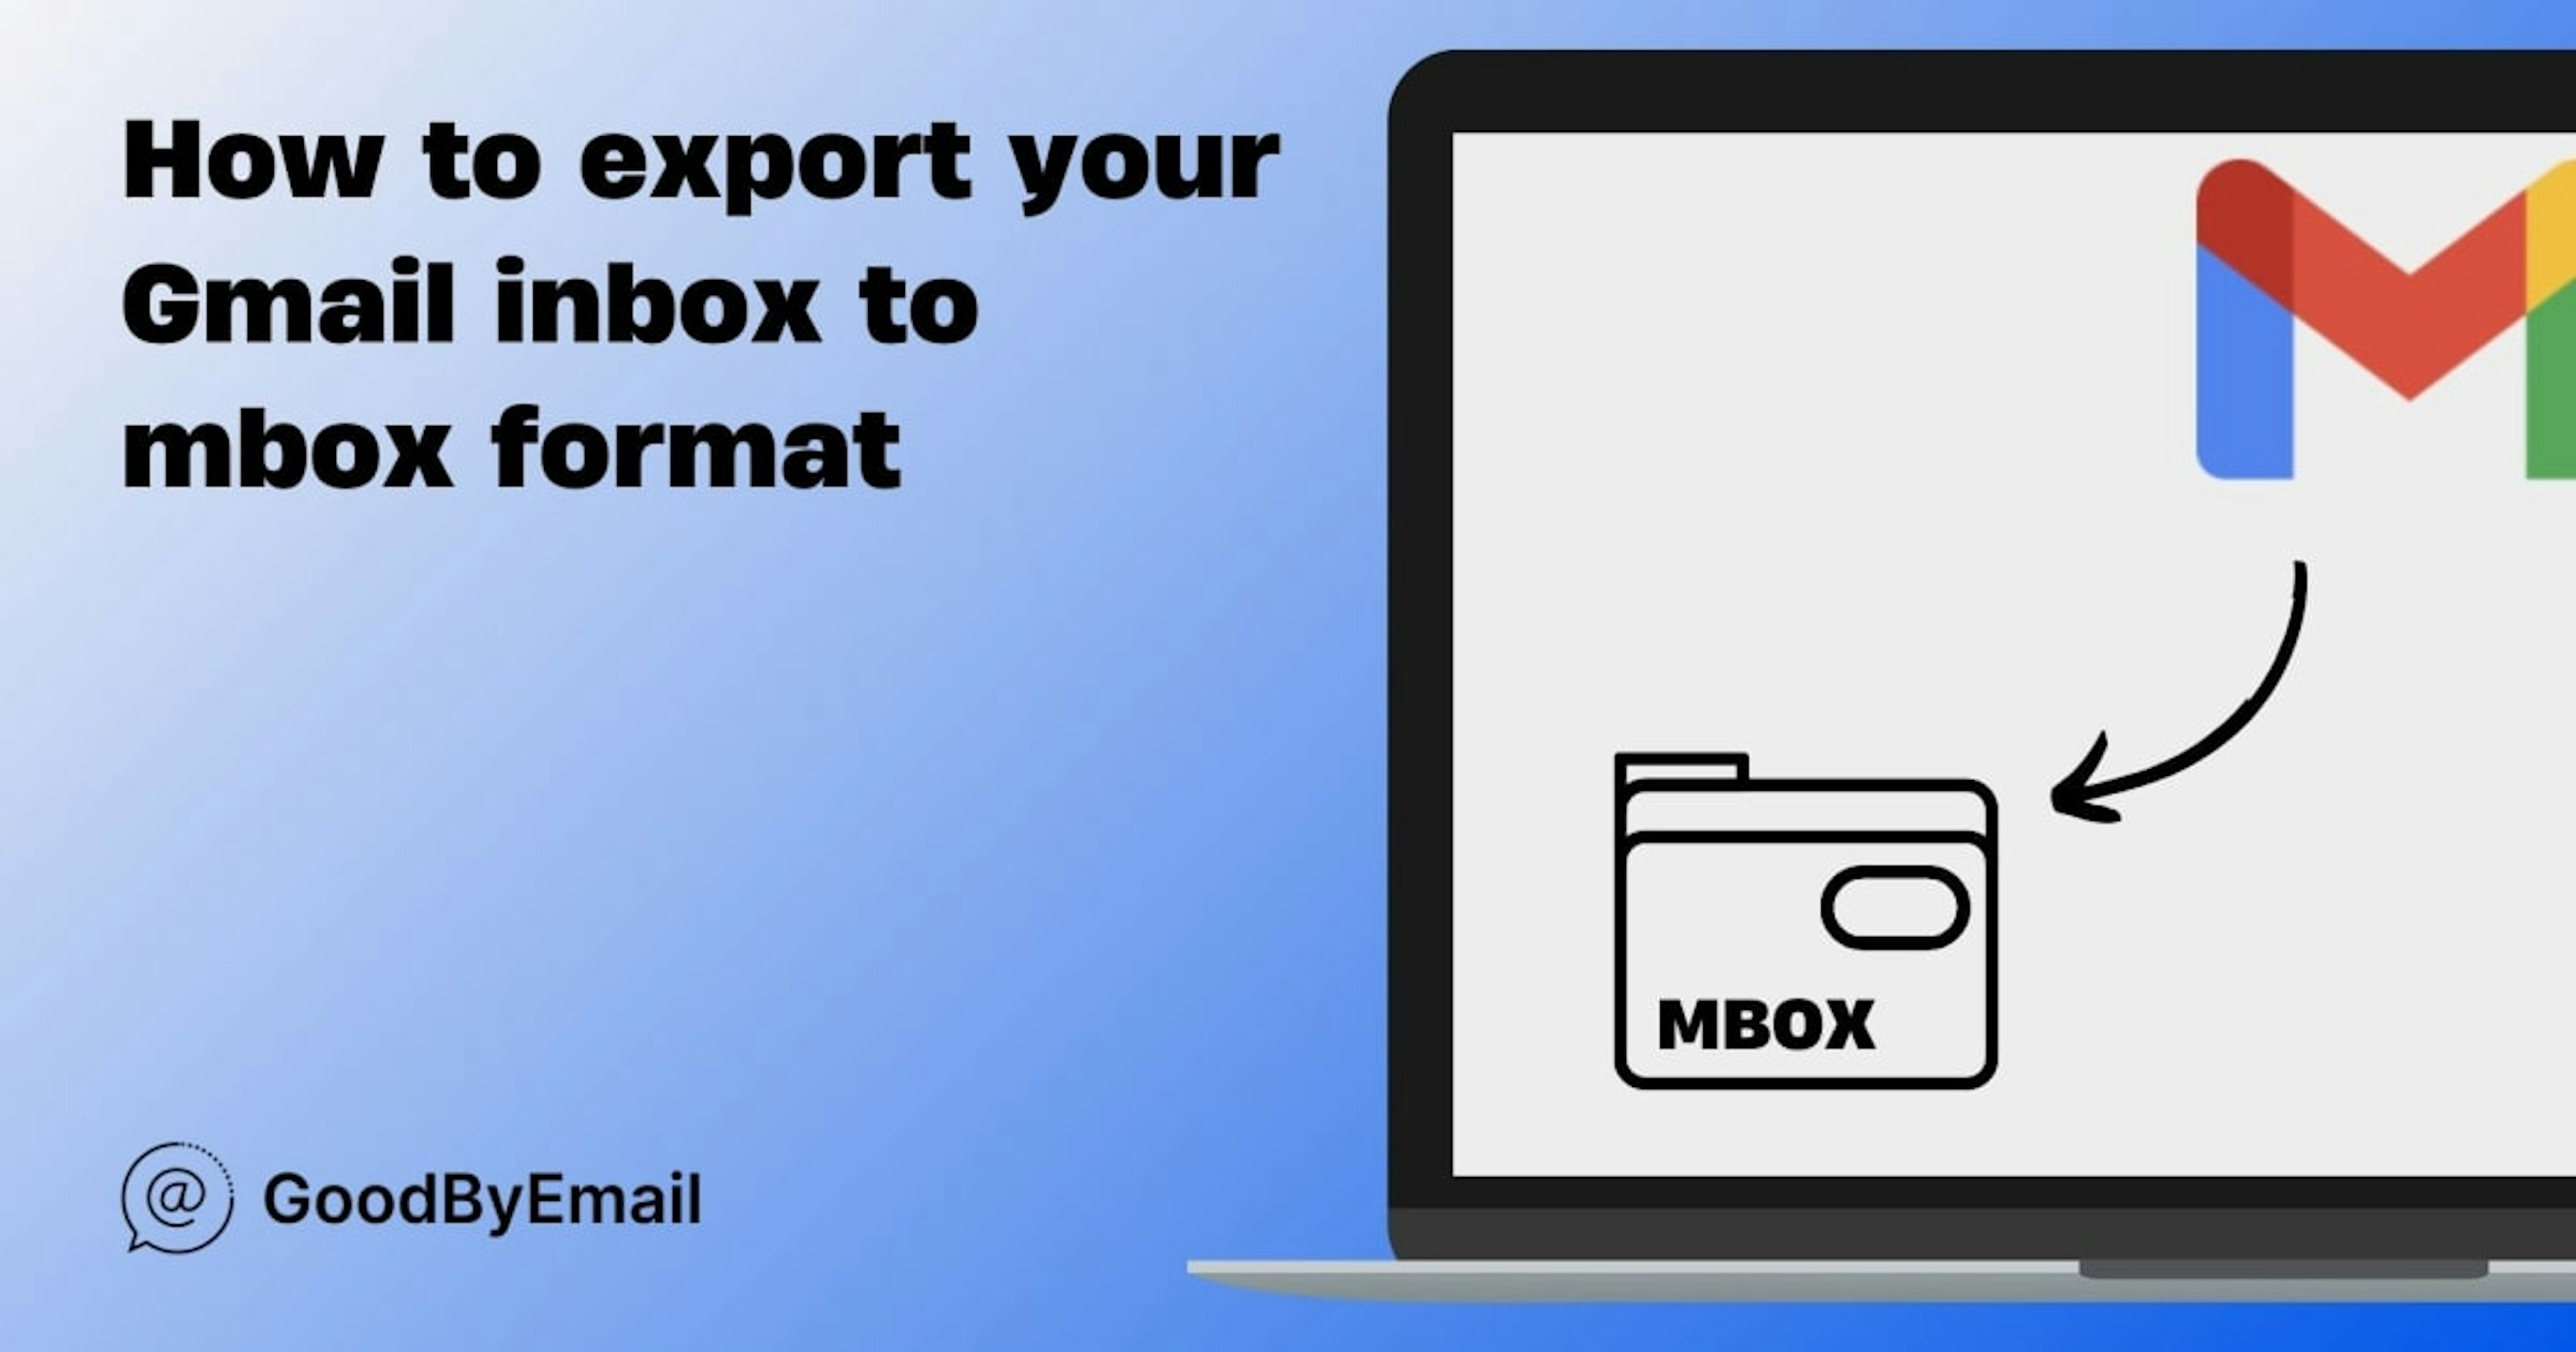 How to Export Gmail Inbox to mbox format